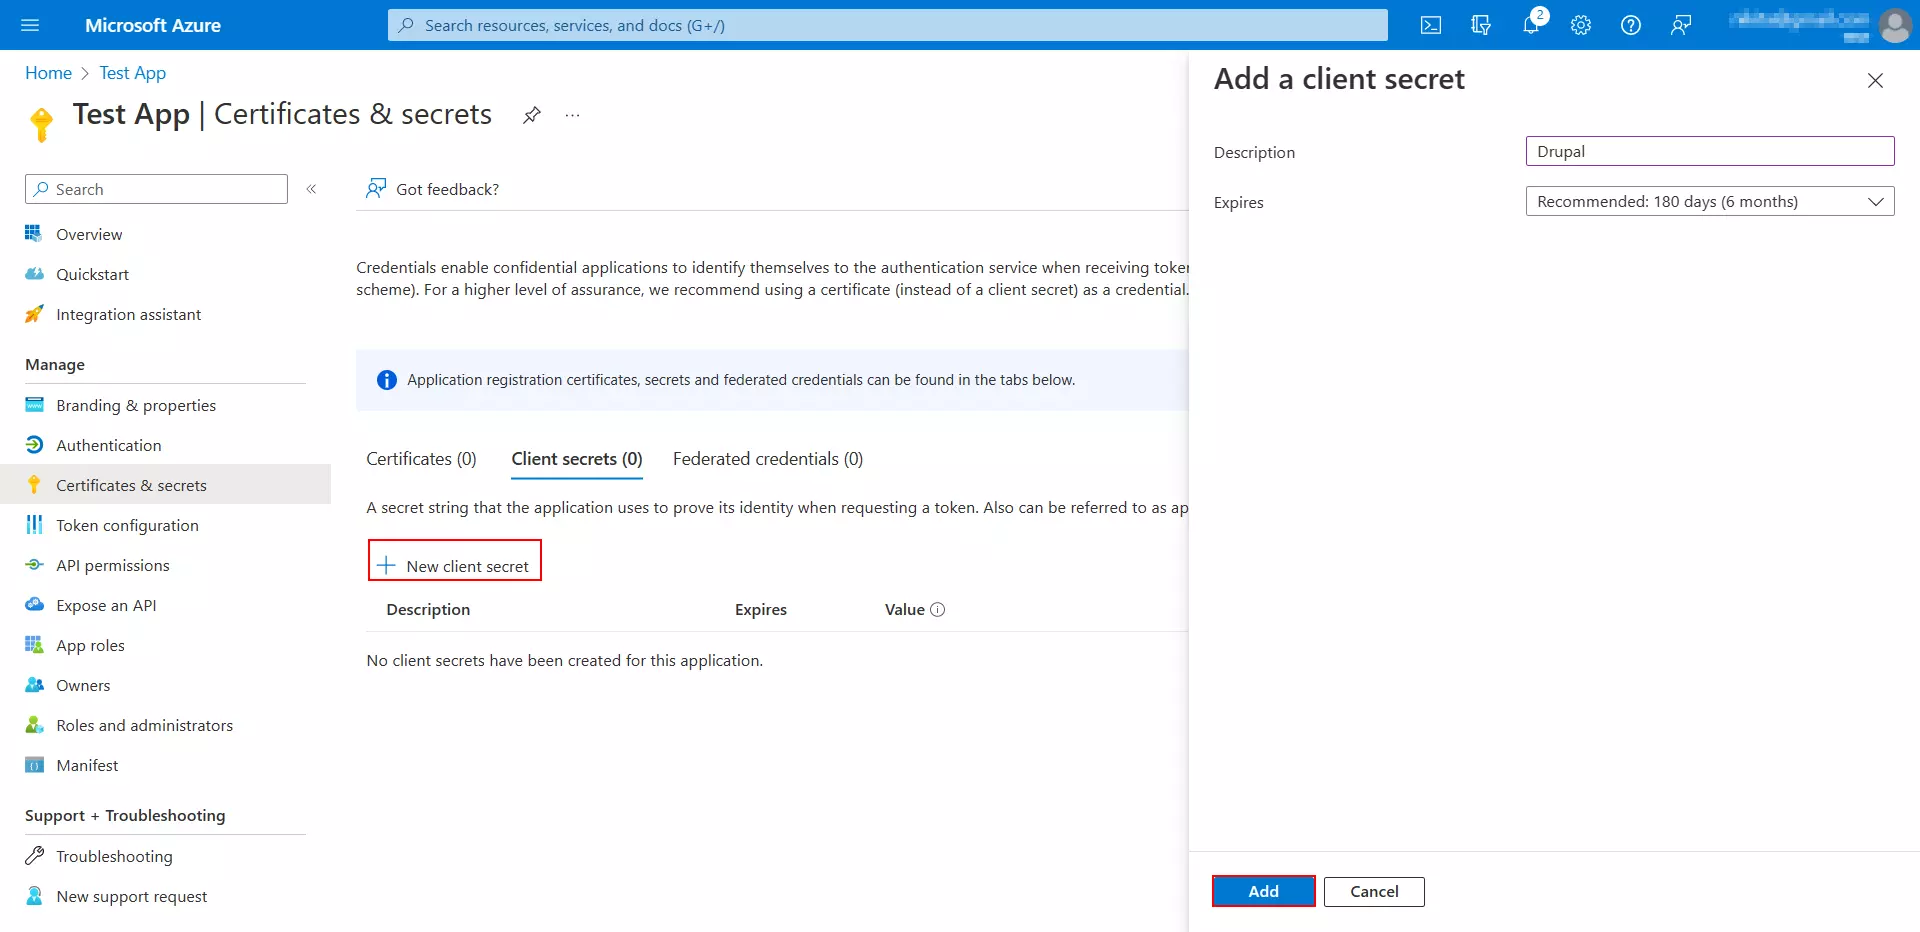 Azure AD SSO - Add a client secret and expires duration in the Add a client secret window